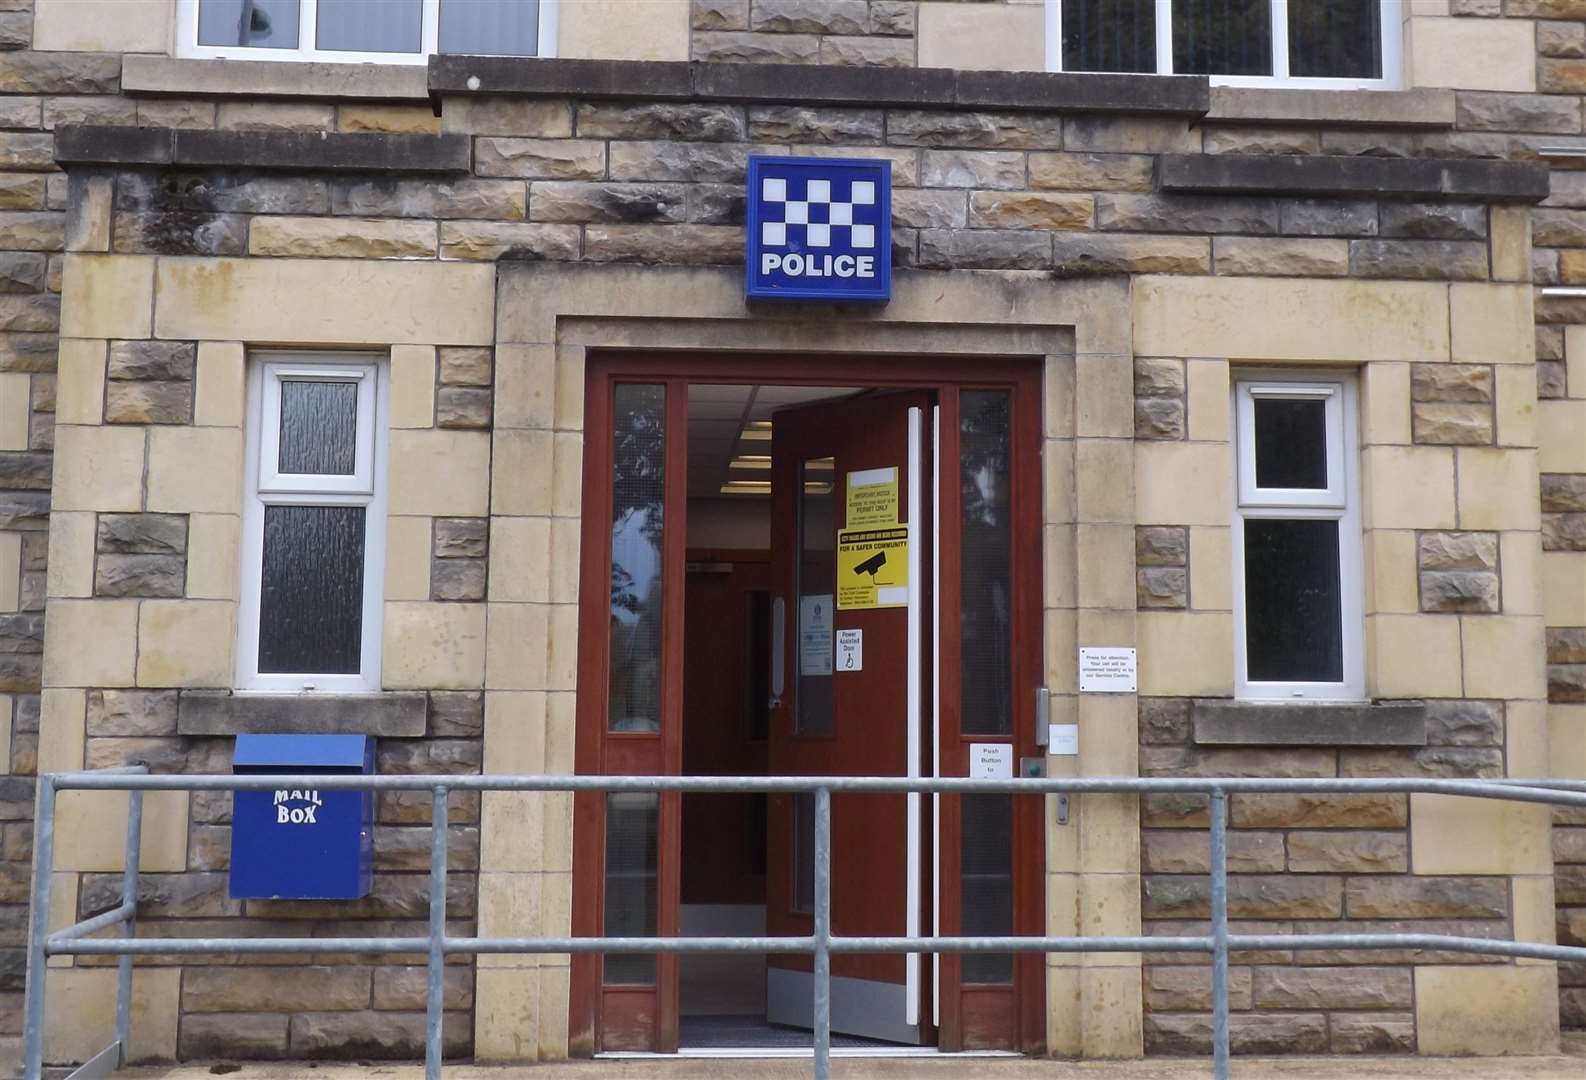 Forres Police Station is open to the public from Monday to Friday.